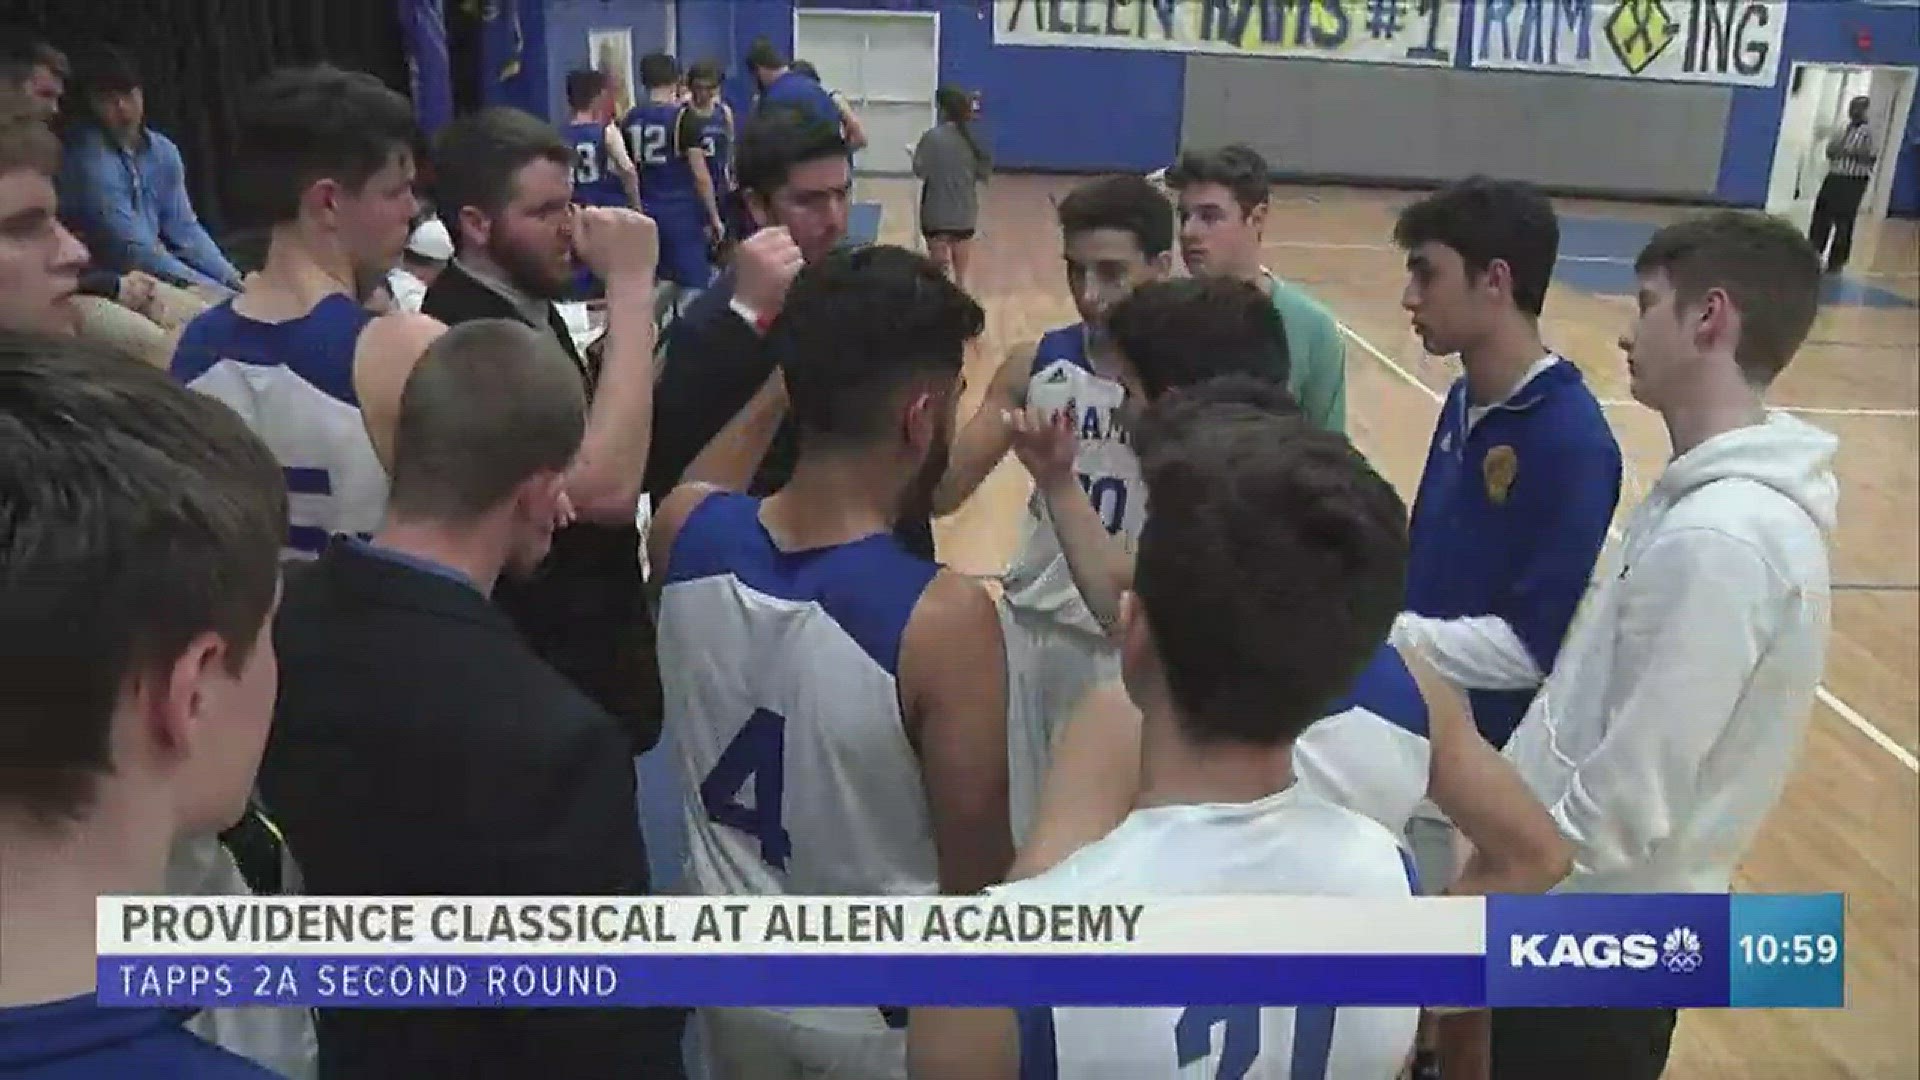 Allen Academy battled back from a 17-point deficit to beat Providence Classical 56-51 in round two of the TAPPS 2A playoffs.